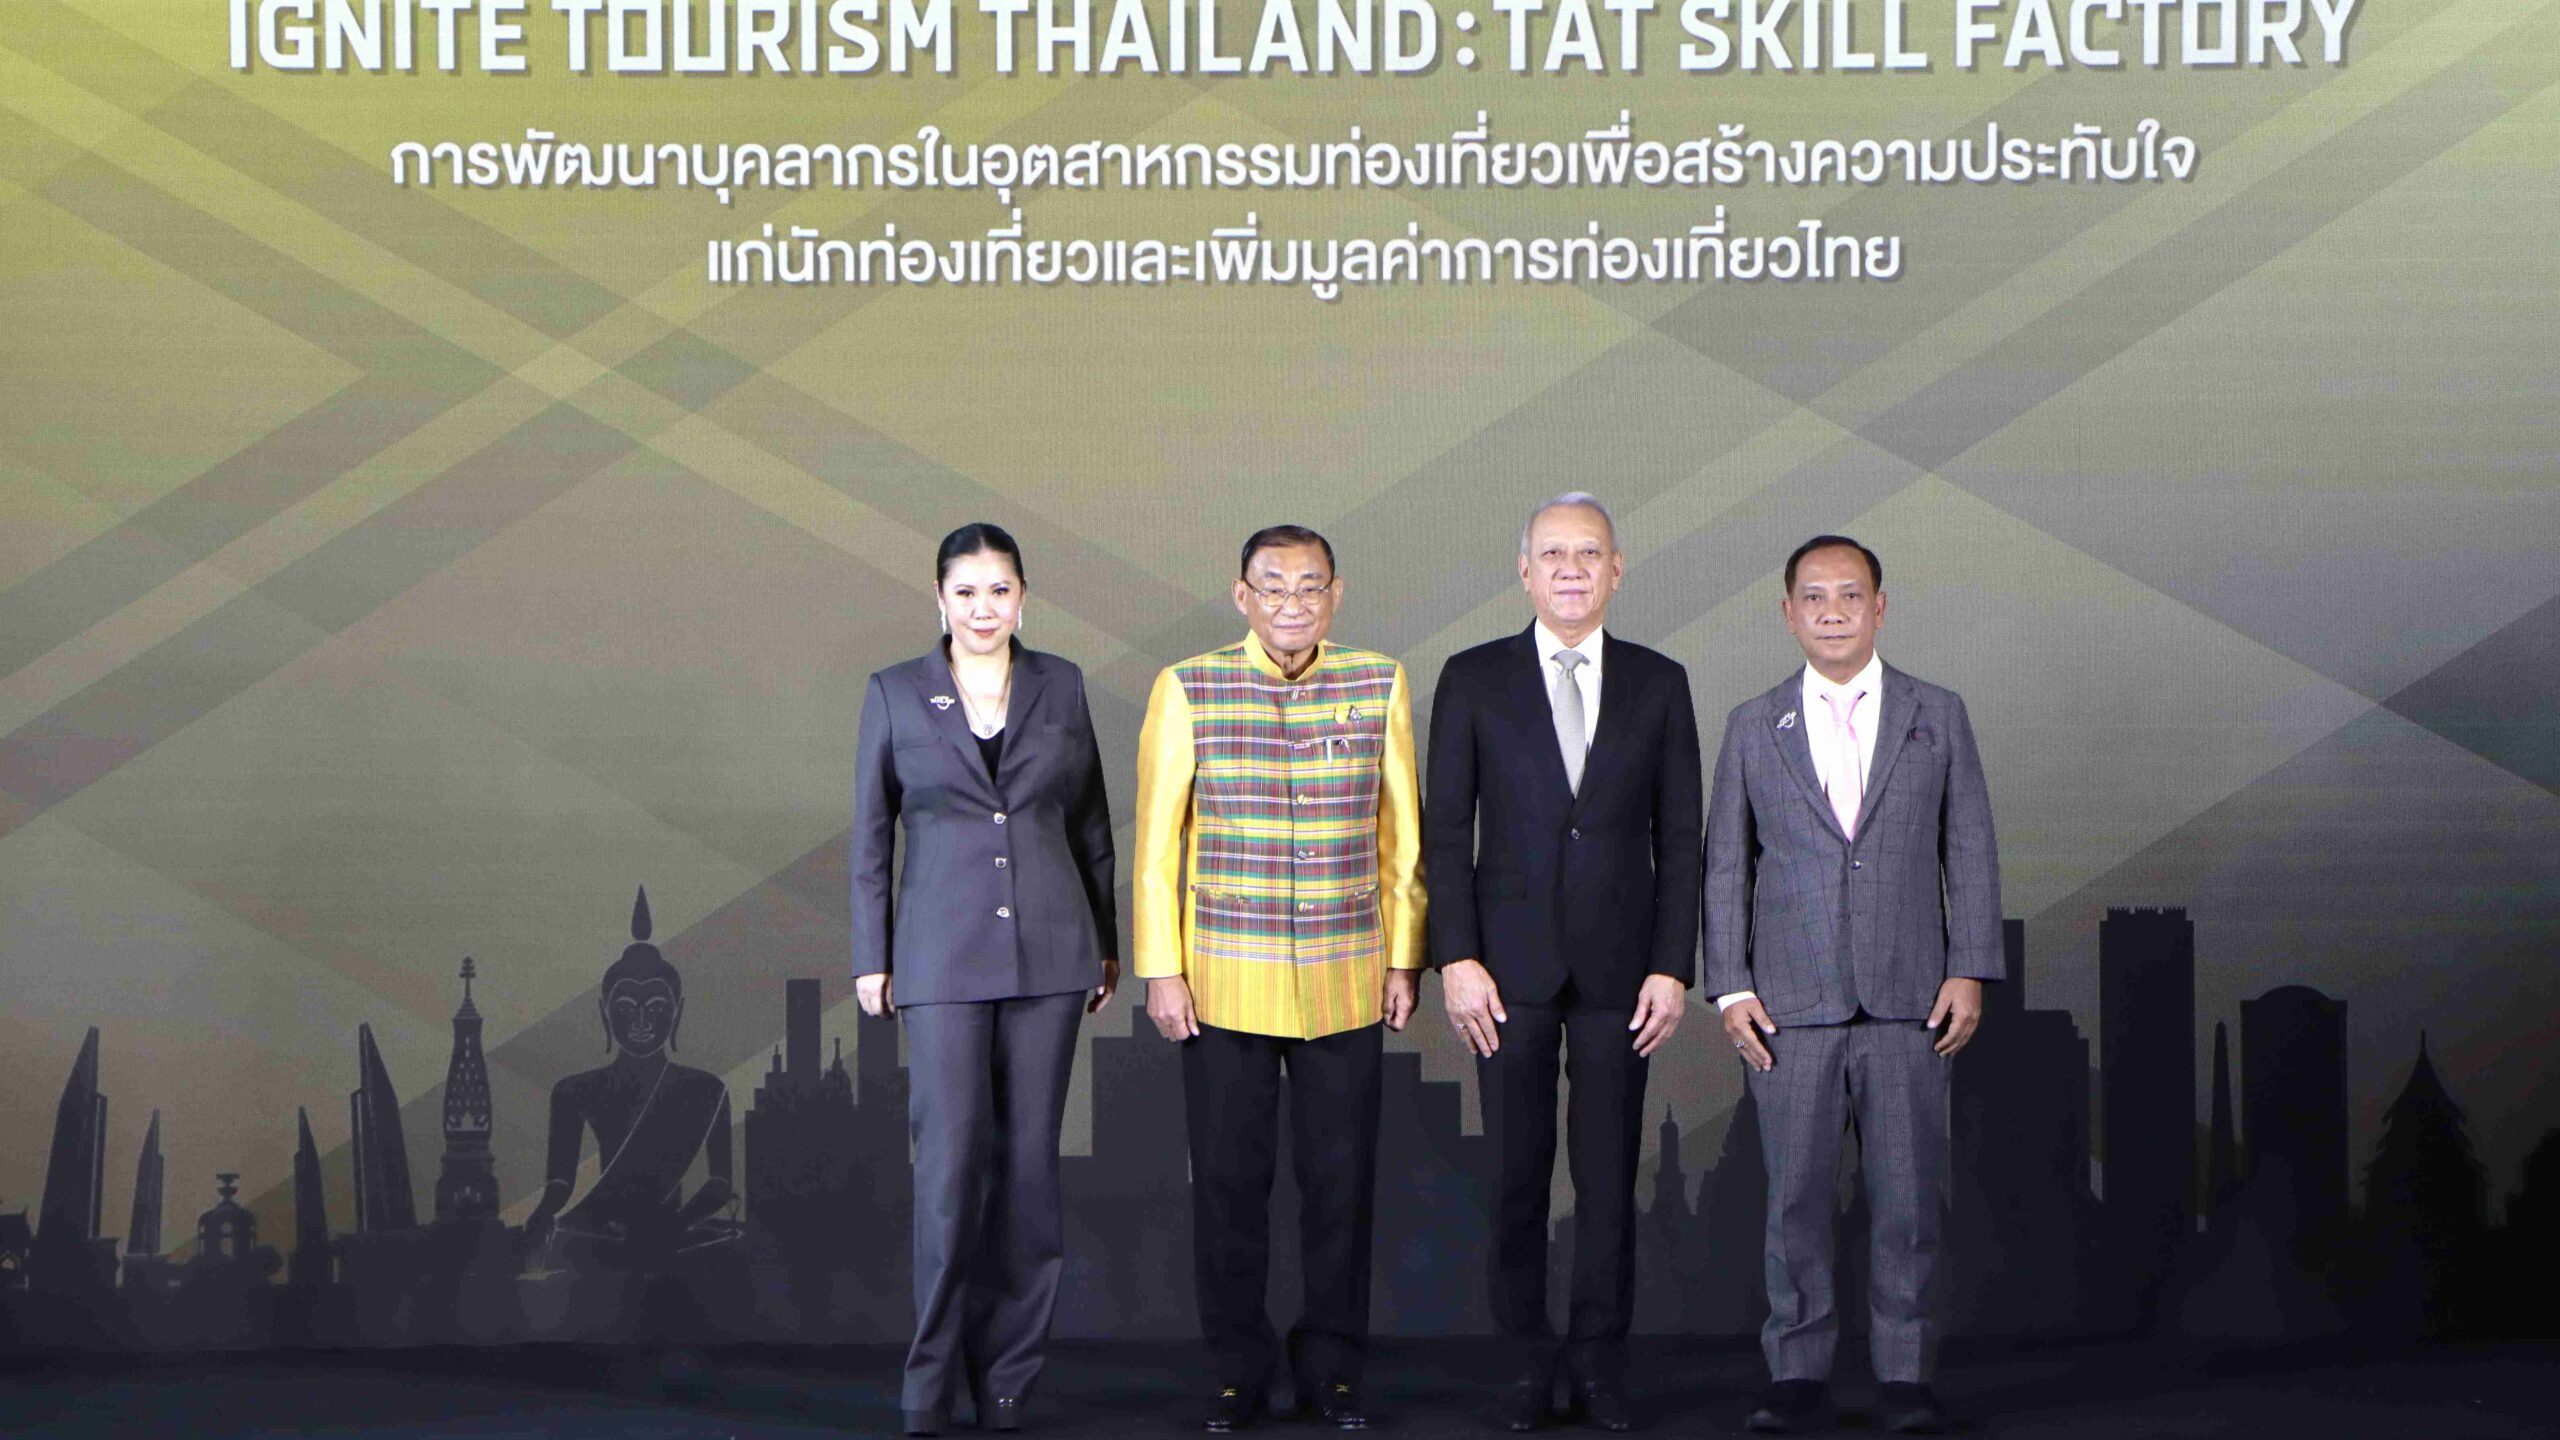 “Ignite Tourism Thailand: TAT Skill Factory” to upskill workers in tourism sector